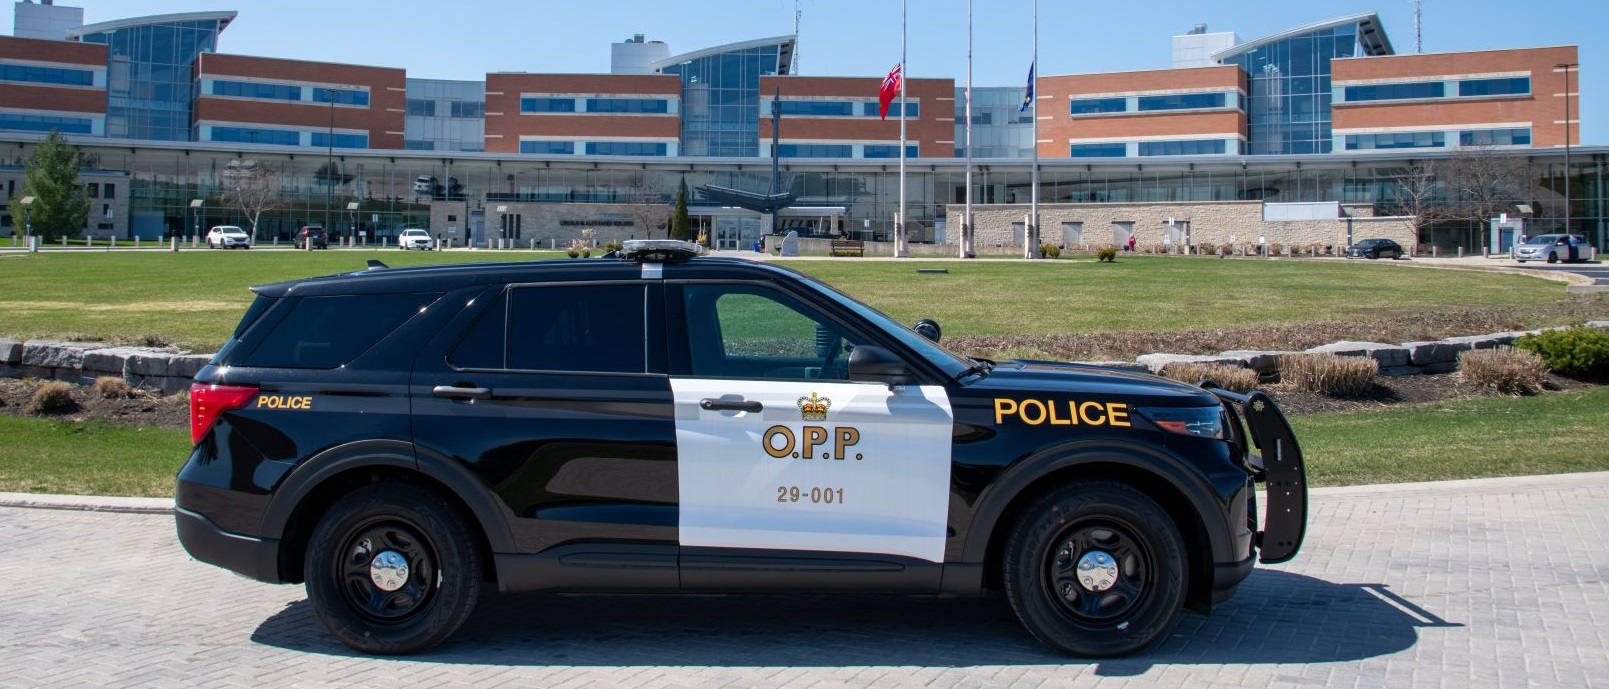 OPP officer, school bus driver killed in crash at intersection in Ontario’s Woodstock